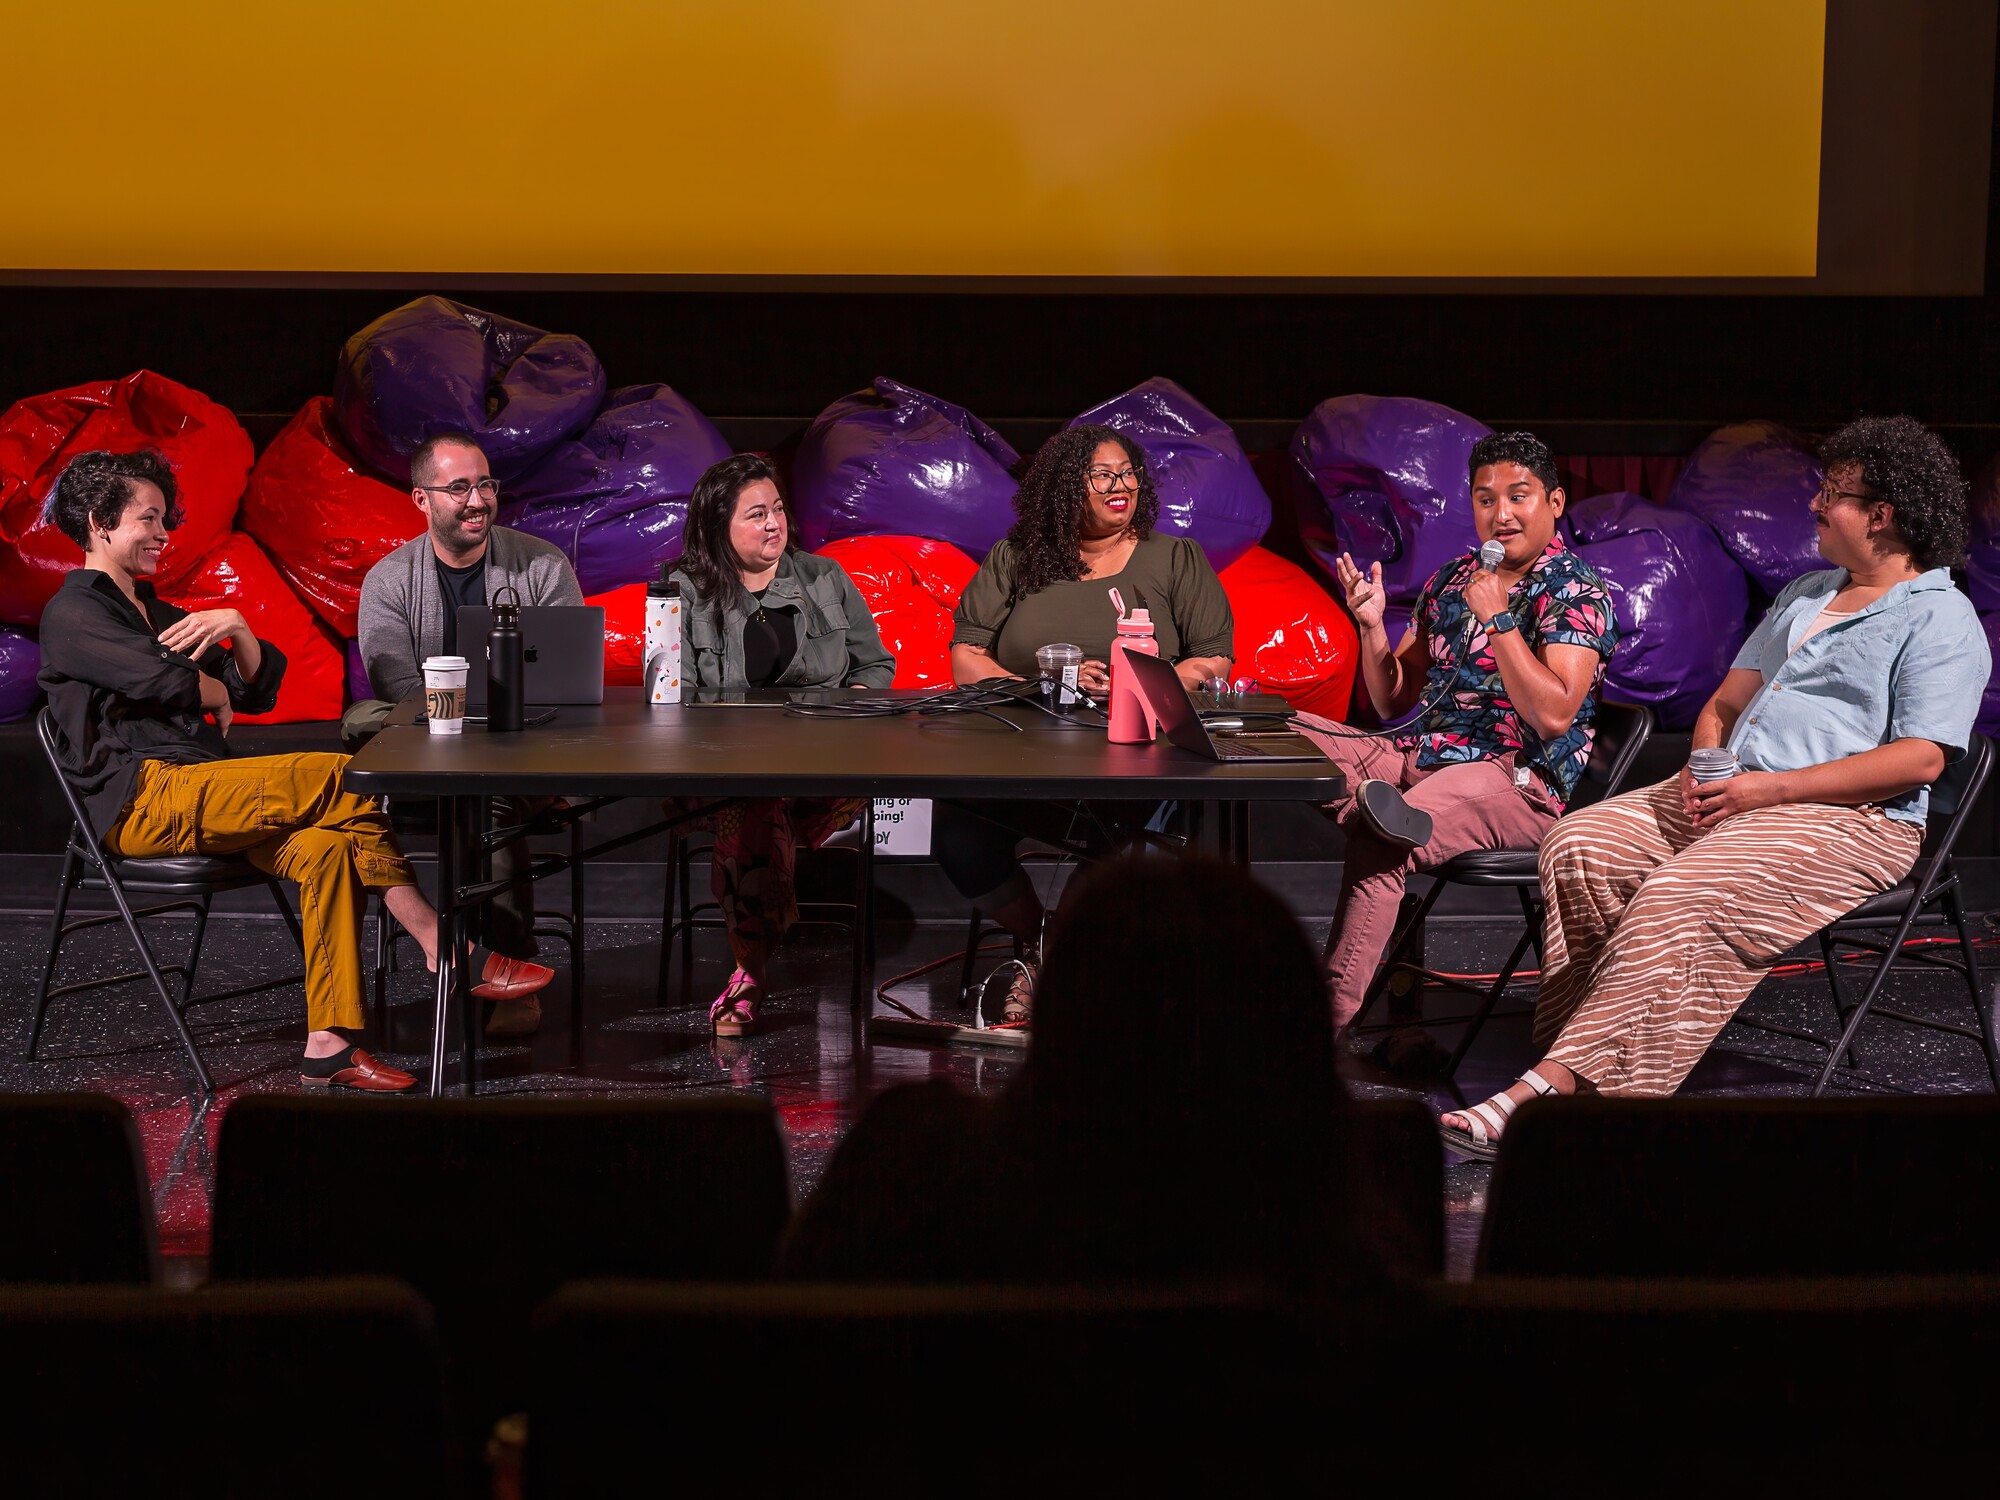 Six artists sit at a table on stage and speak during a panel.